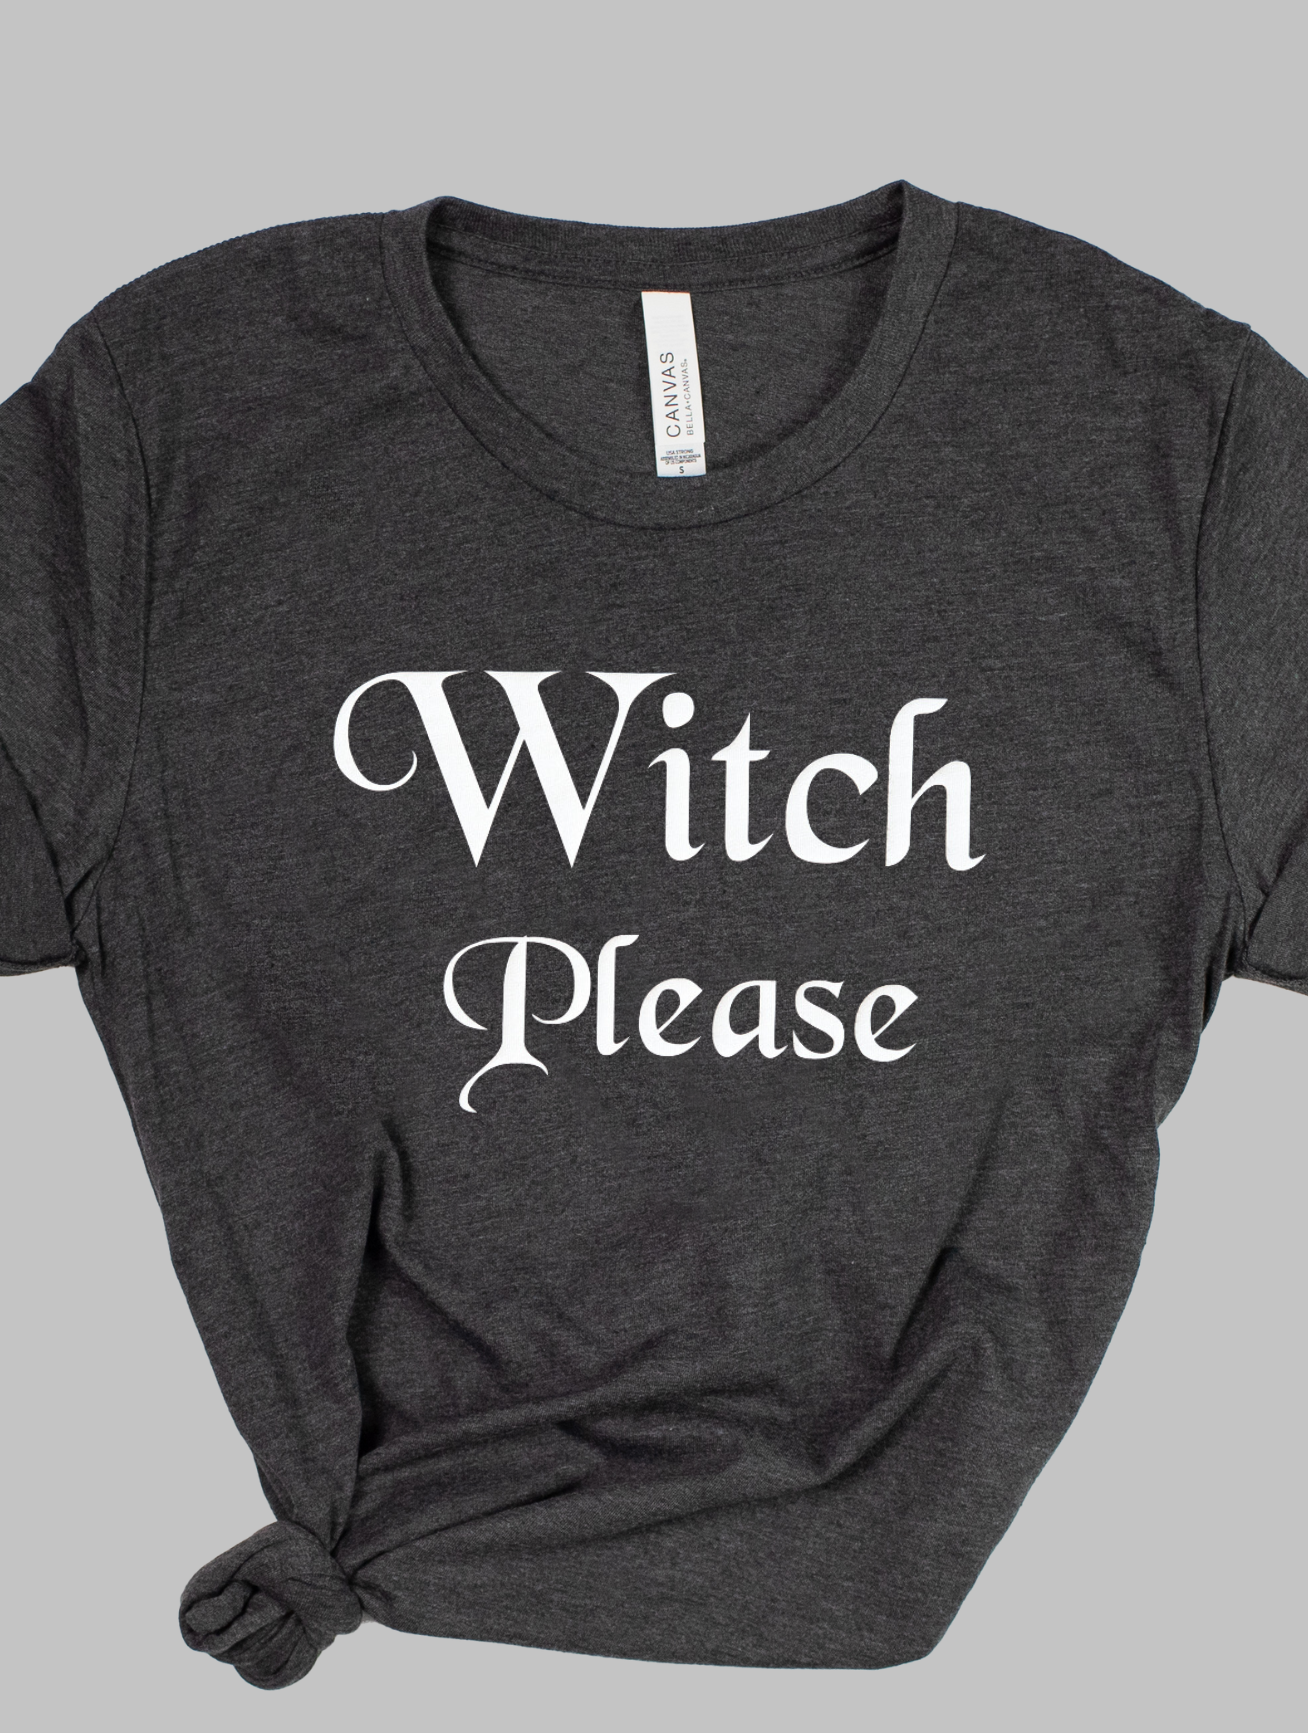 Witch Please - Unisex Adult T-shirt